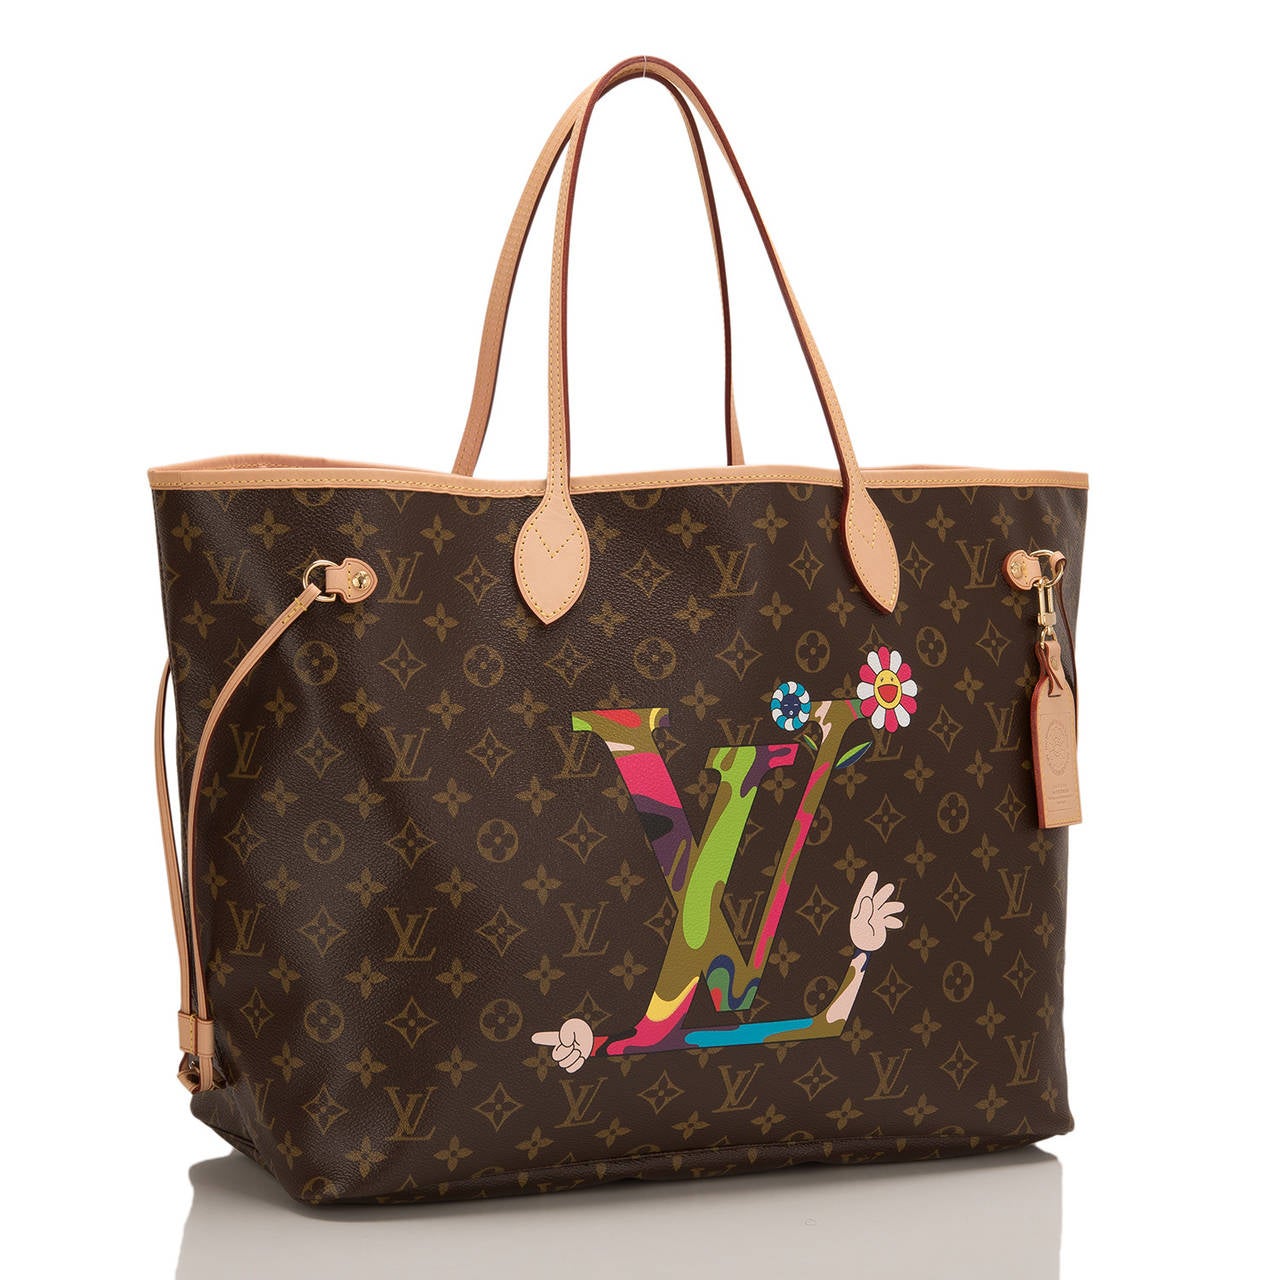 Louis Vuitton limited edition Murakami MOCA Neverfull GM tote of coated canvas and designed by Takashi Murakami for the Museum of Contemporary Art.

This classic tote features a large screen printed Murakami cartoon hands in the LV trademark on